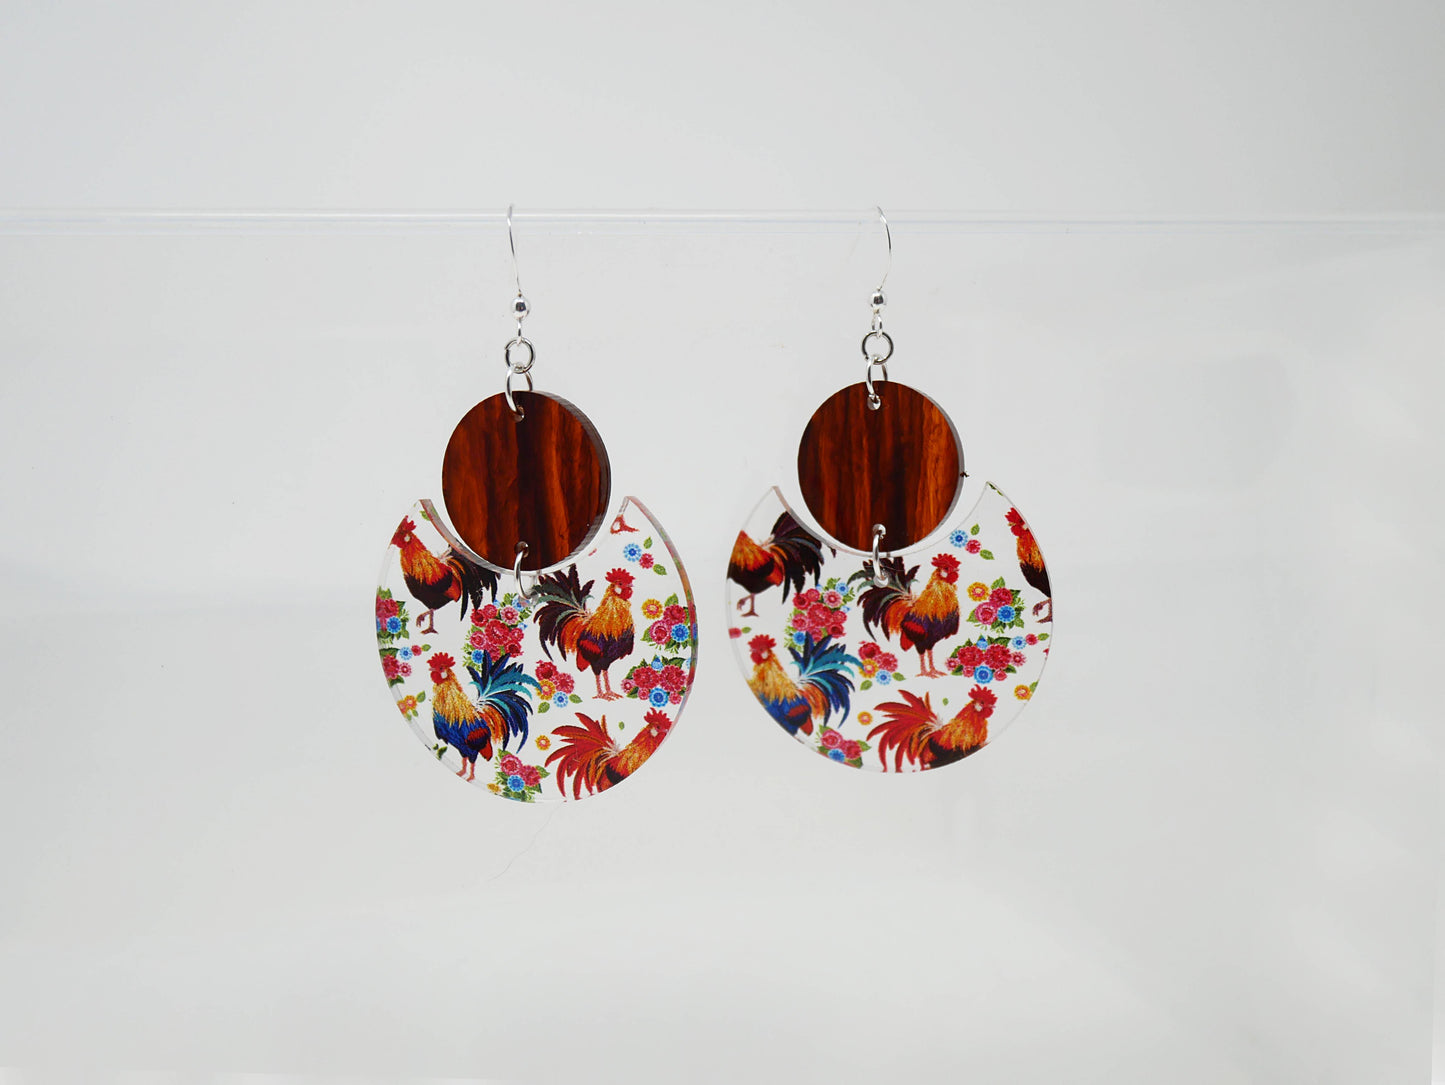 Rooster Pattern Earrings | Sterling Silver, Stainless Steel, or Clip On